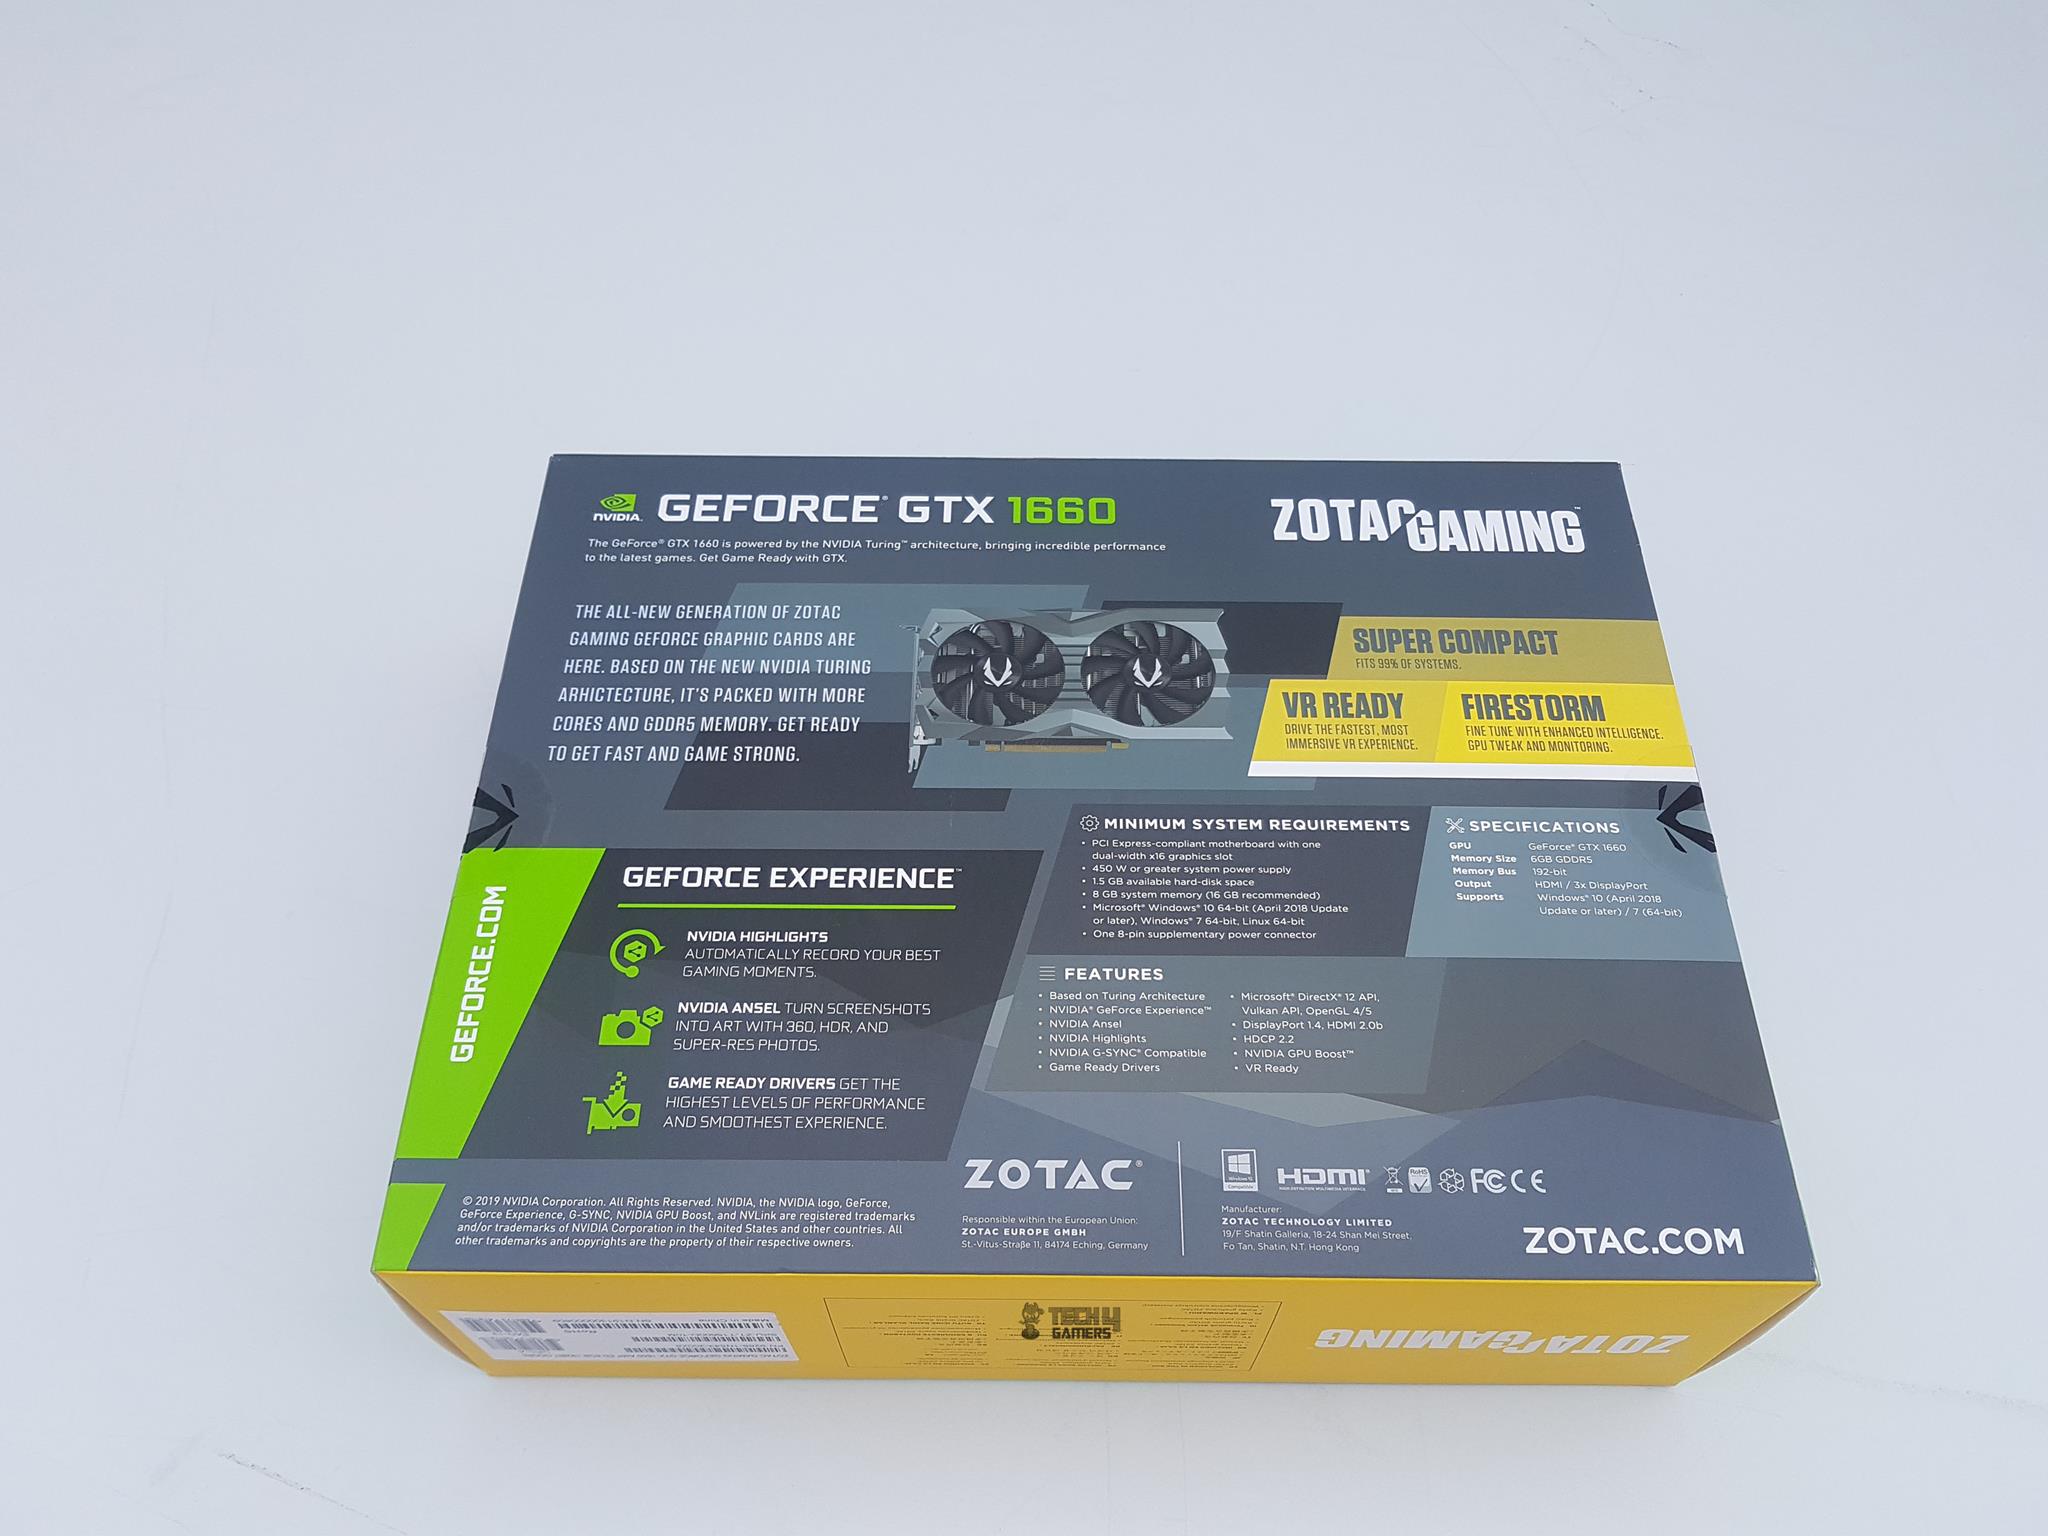 ZOTAC GeForce GTX 1660 Amp Edition — The backside of the box